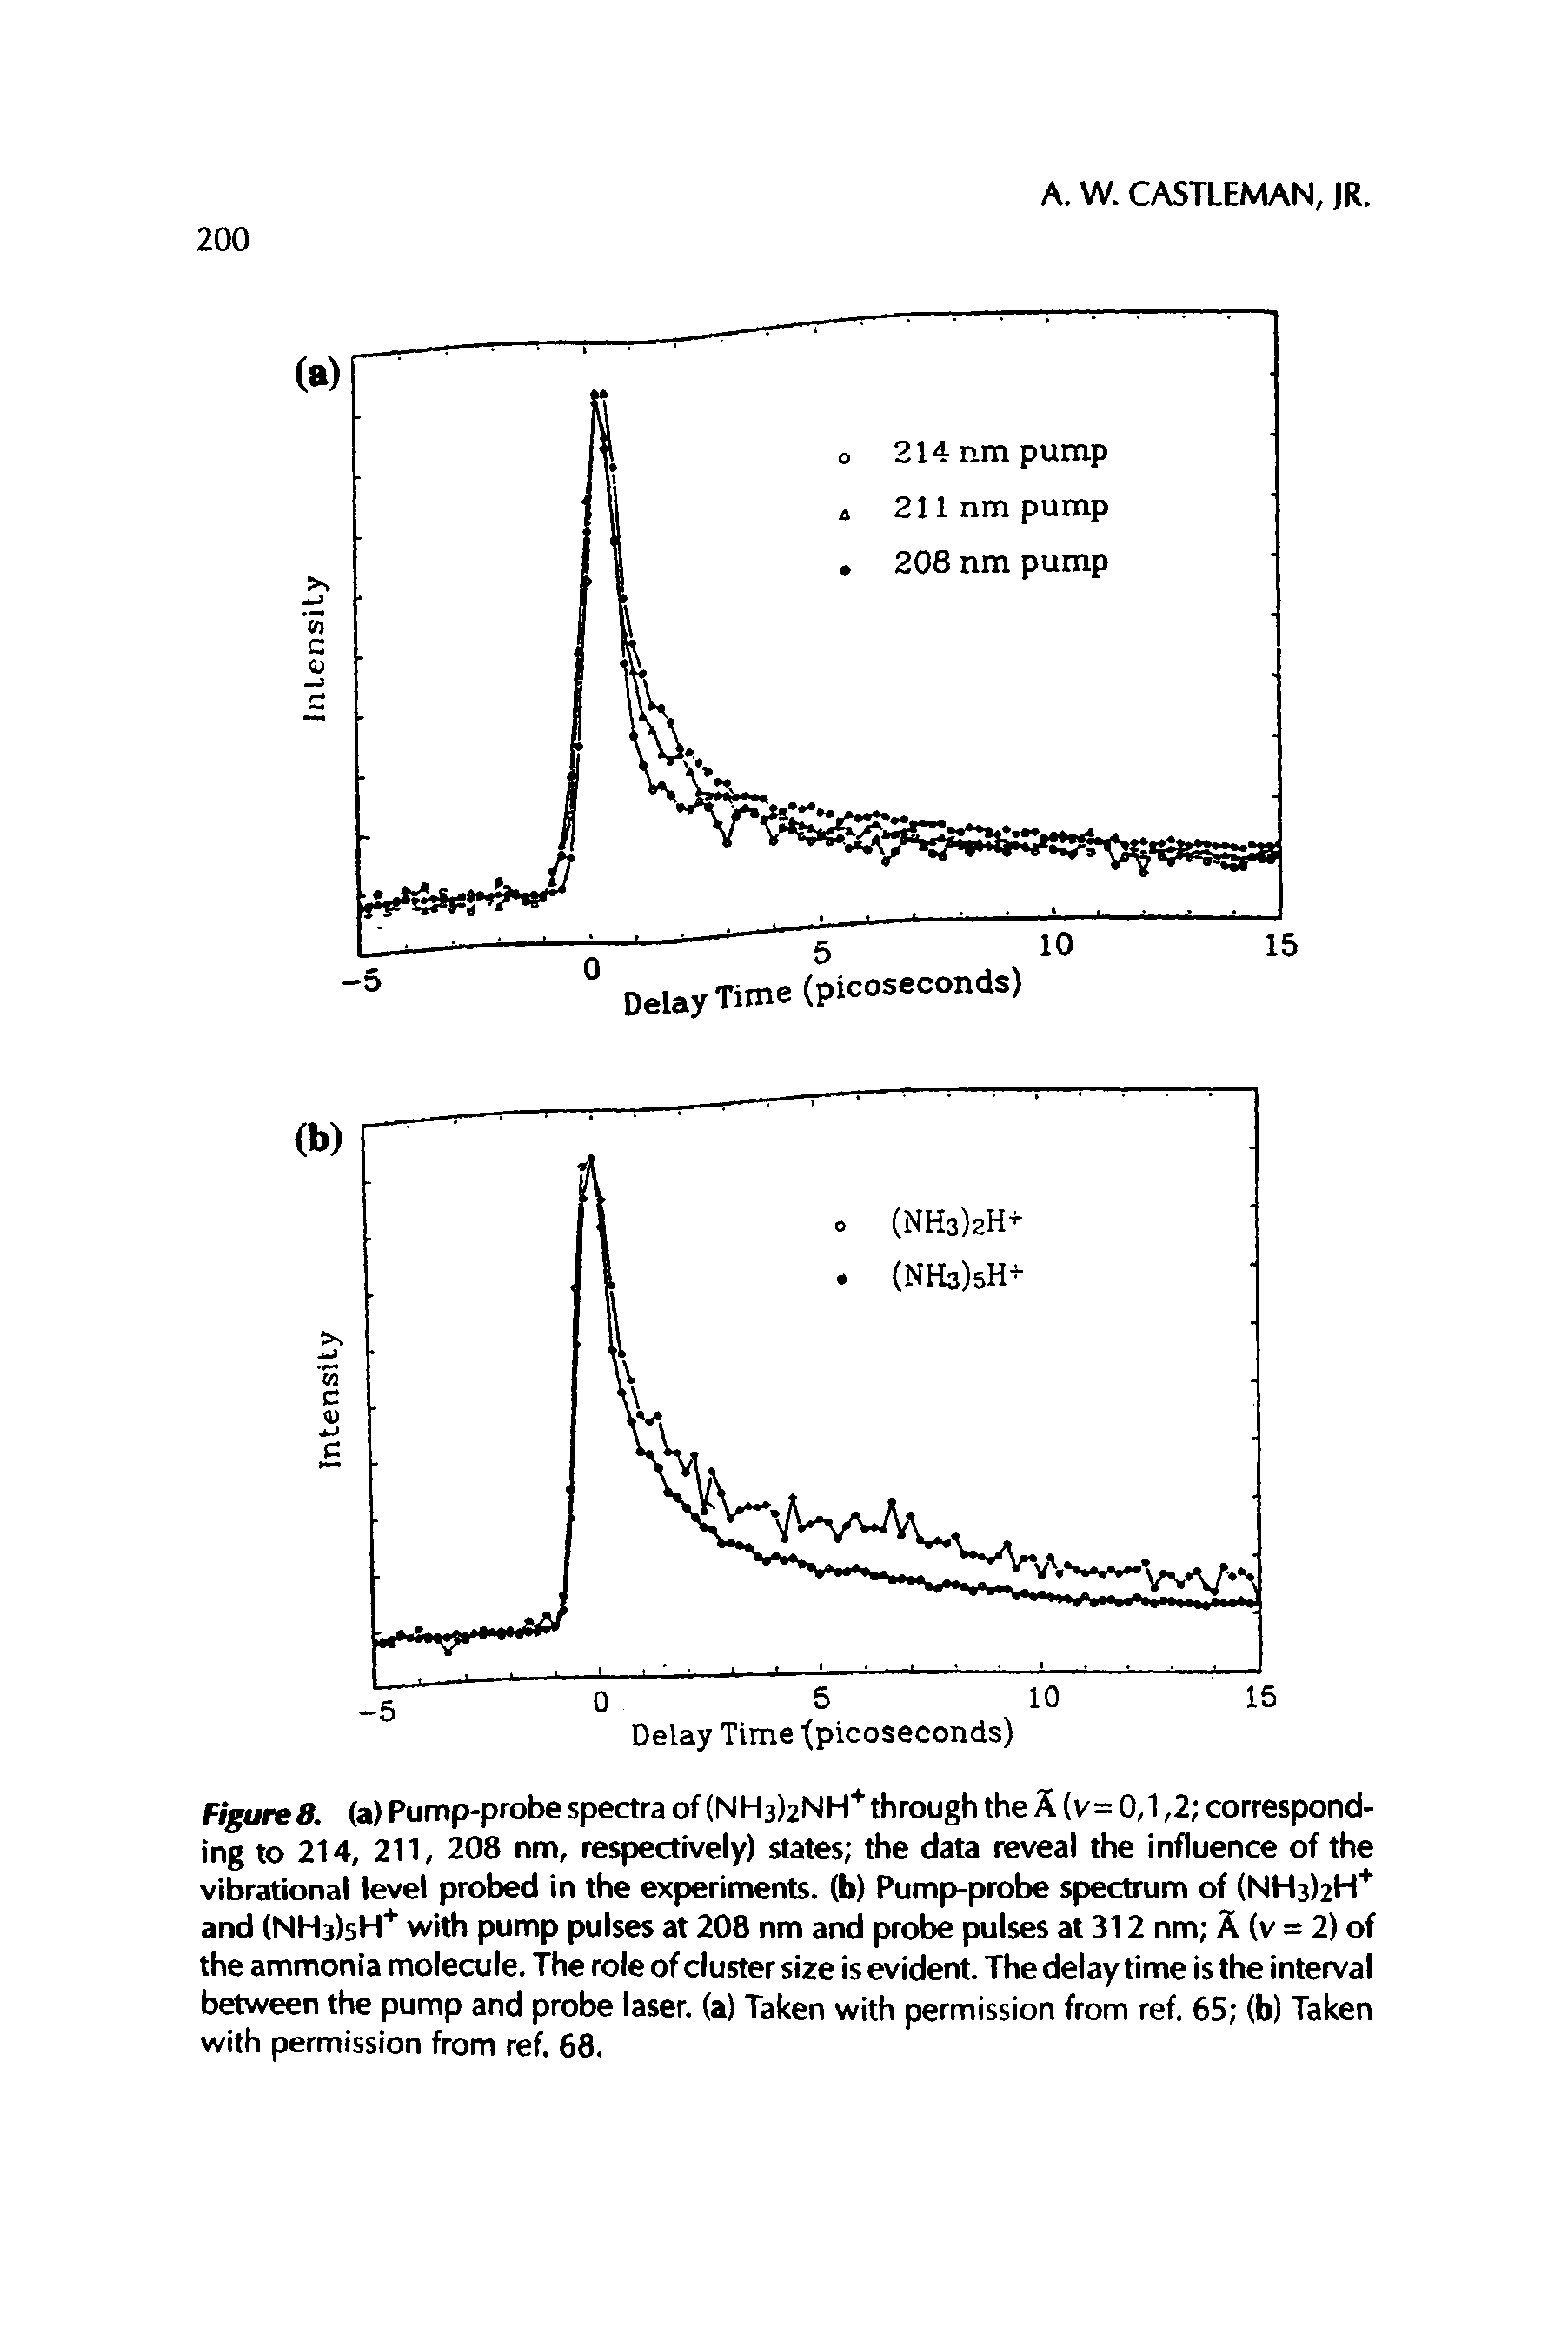 Figure8. (a) Pump-probe spectra of (NH3)2NH+ through the A (v= 0,1,2 corresponding to 214, 211, 208 nm, respectively) states the data reveal the influence of the vibrational level probed in the experiments, (b) Pump-probe spectrum of (NH3hH+ and (NH3)sH+ with pump pulses at 208 nm and probe pulses at 312 nm A (v = 2) of the ammonia molecule. The role of cluster size is evident. The delay time is the interval between the pump and probe laser, (a) Taken with permission from ref. 65 (b) Taken with permission from ref. 68.